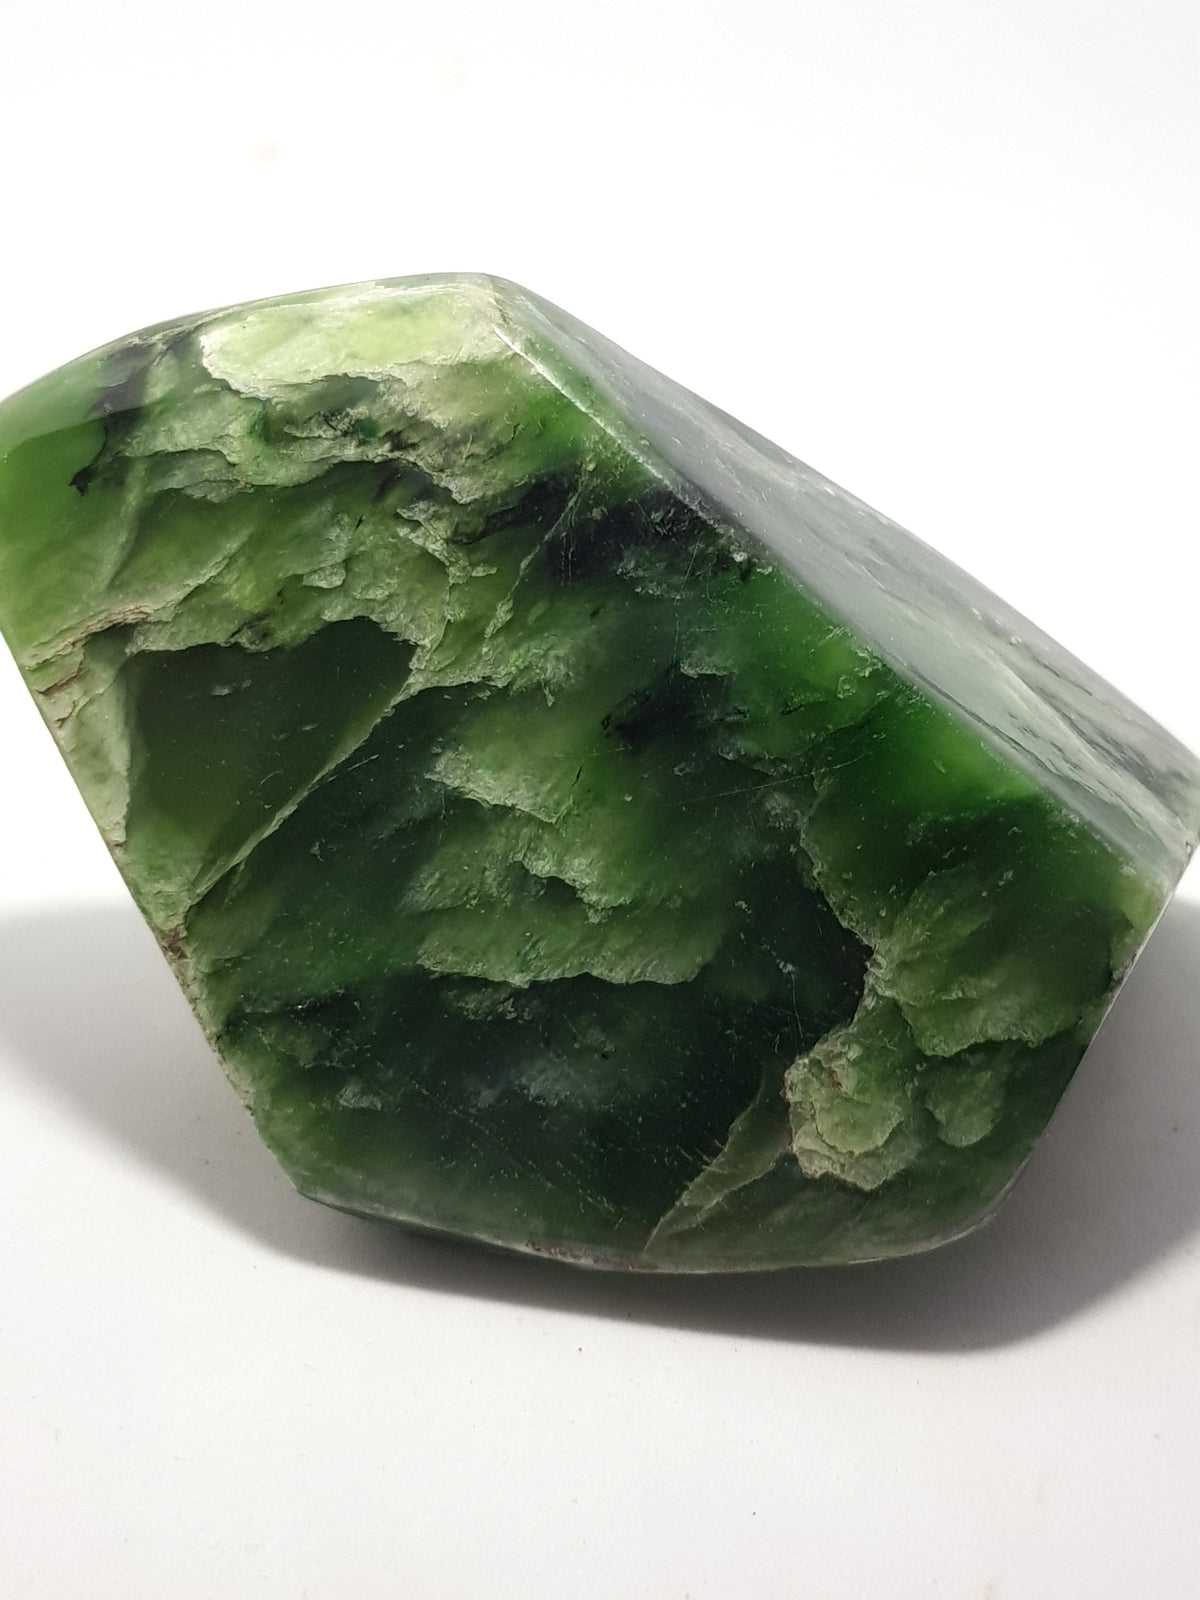 an angular freeform of nephrite jade. It is a rich green with creamy green patterns which look like trees or waves.